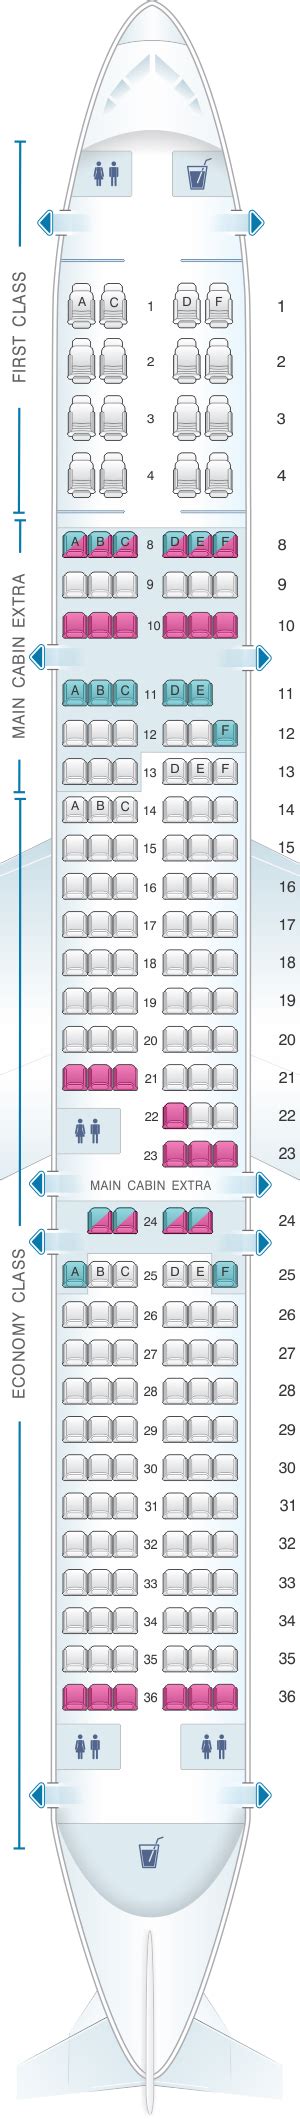 American Airlines Seat Map Airbus A321